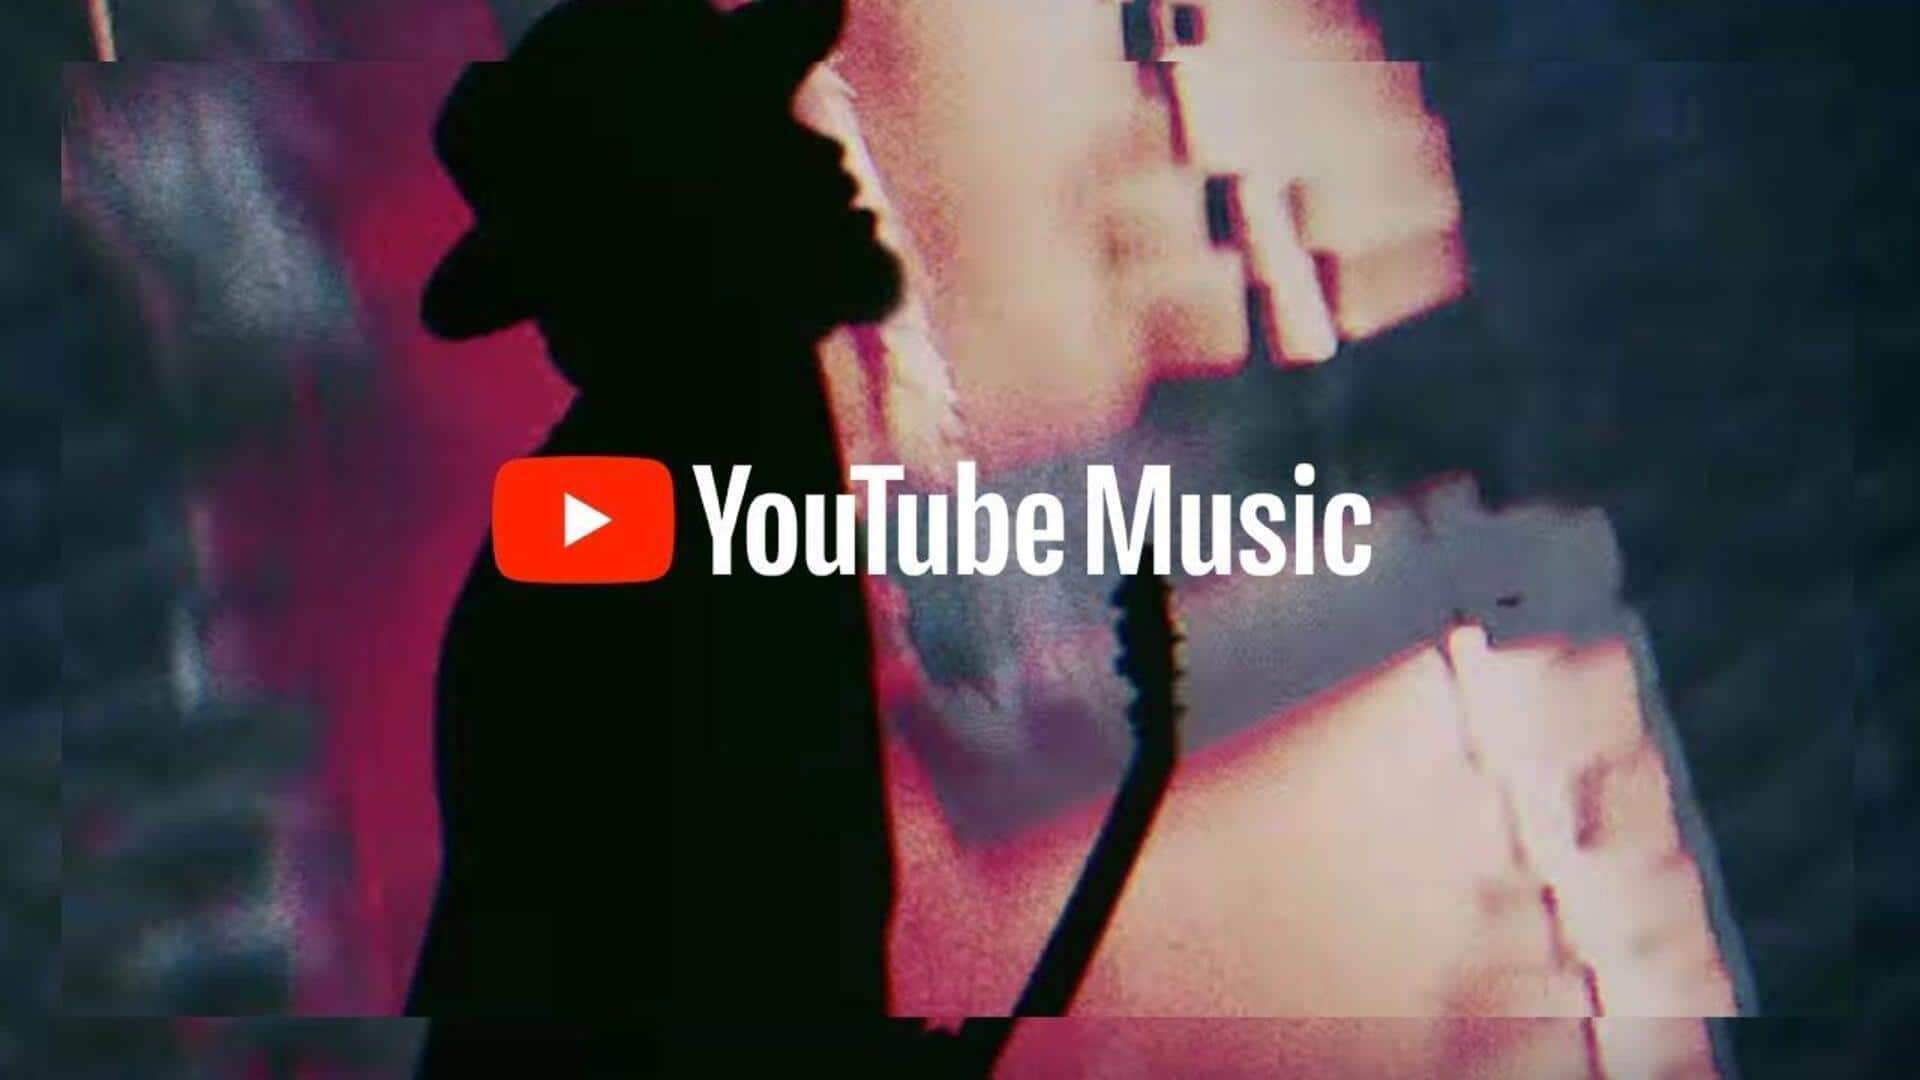 YouTube Music on iOS adds swipe gesture for next/previous song